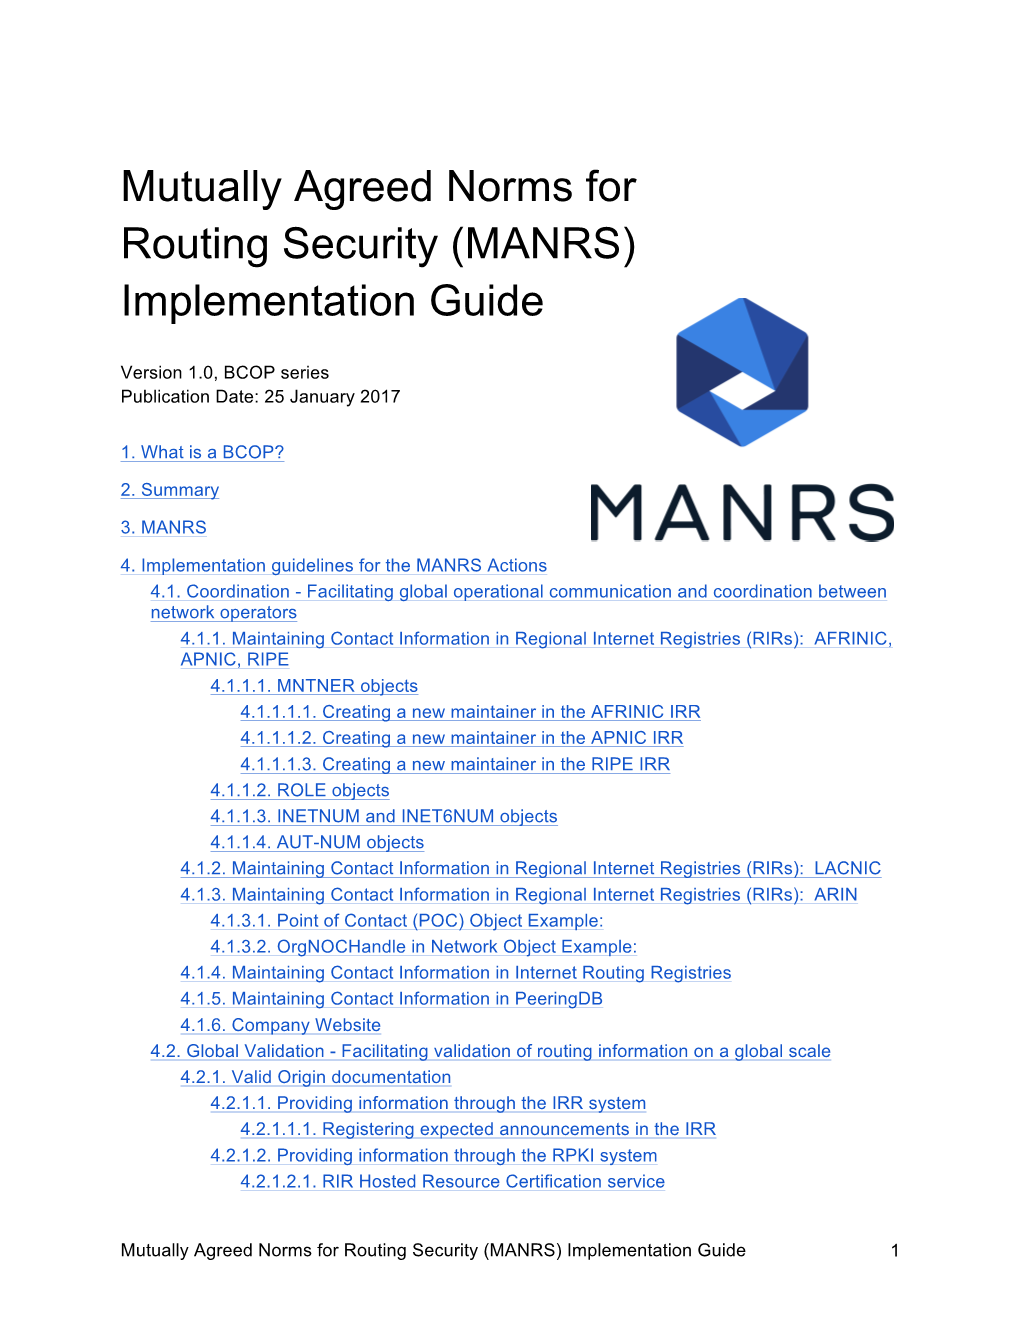 Mutually Agreed Norms for Routing Security (MANRS) Implementation Guide